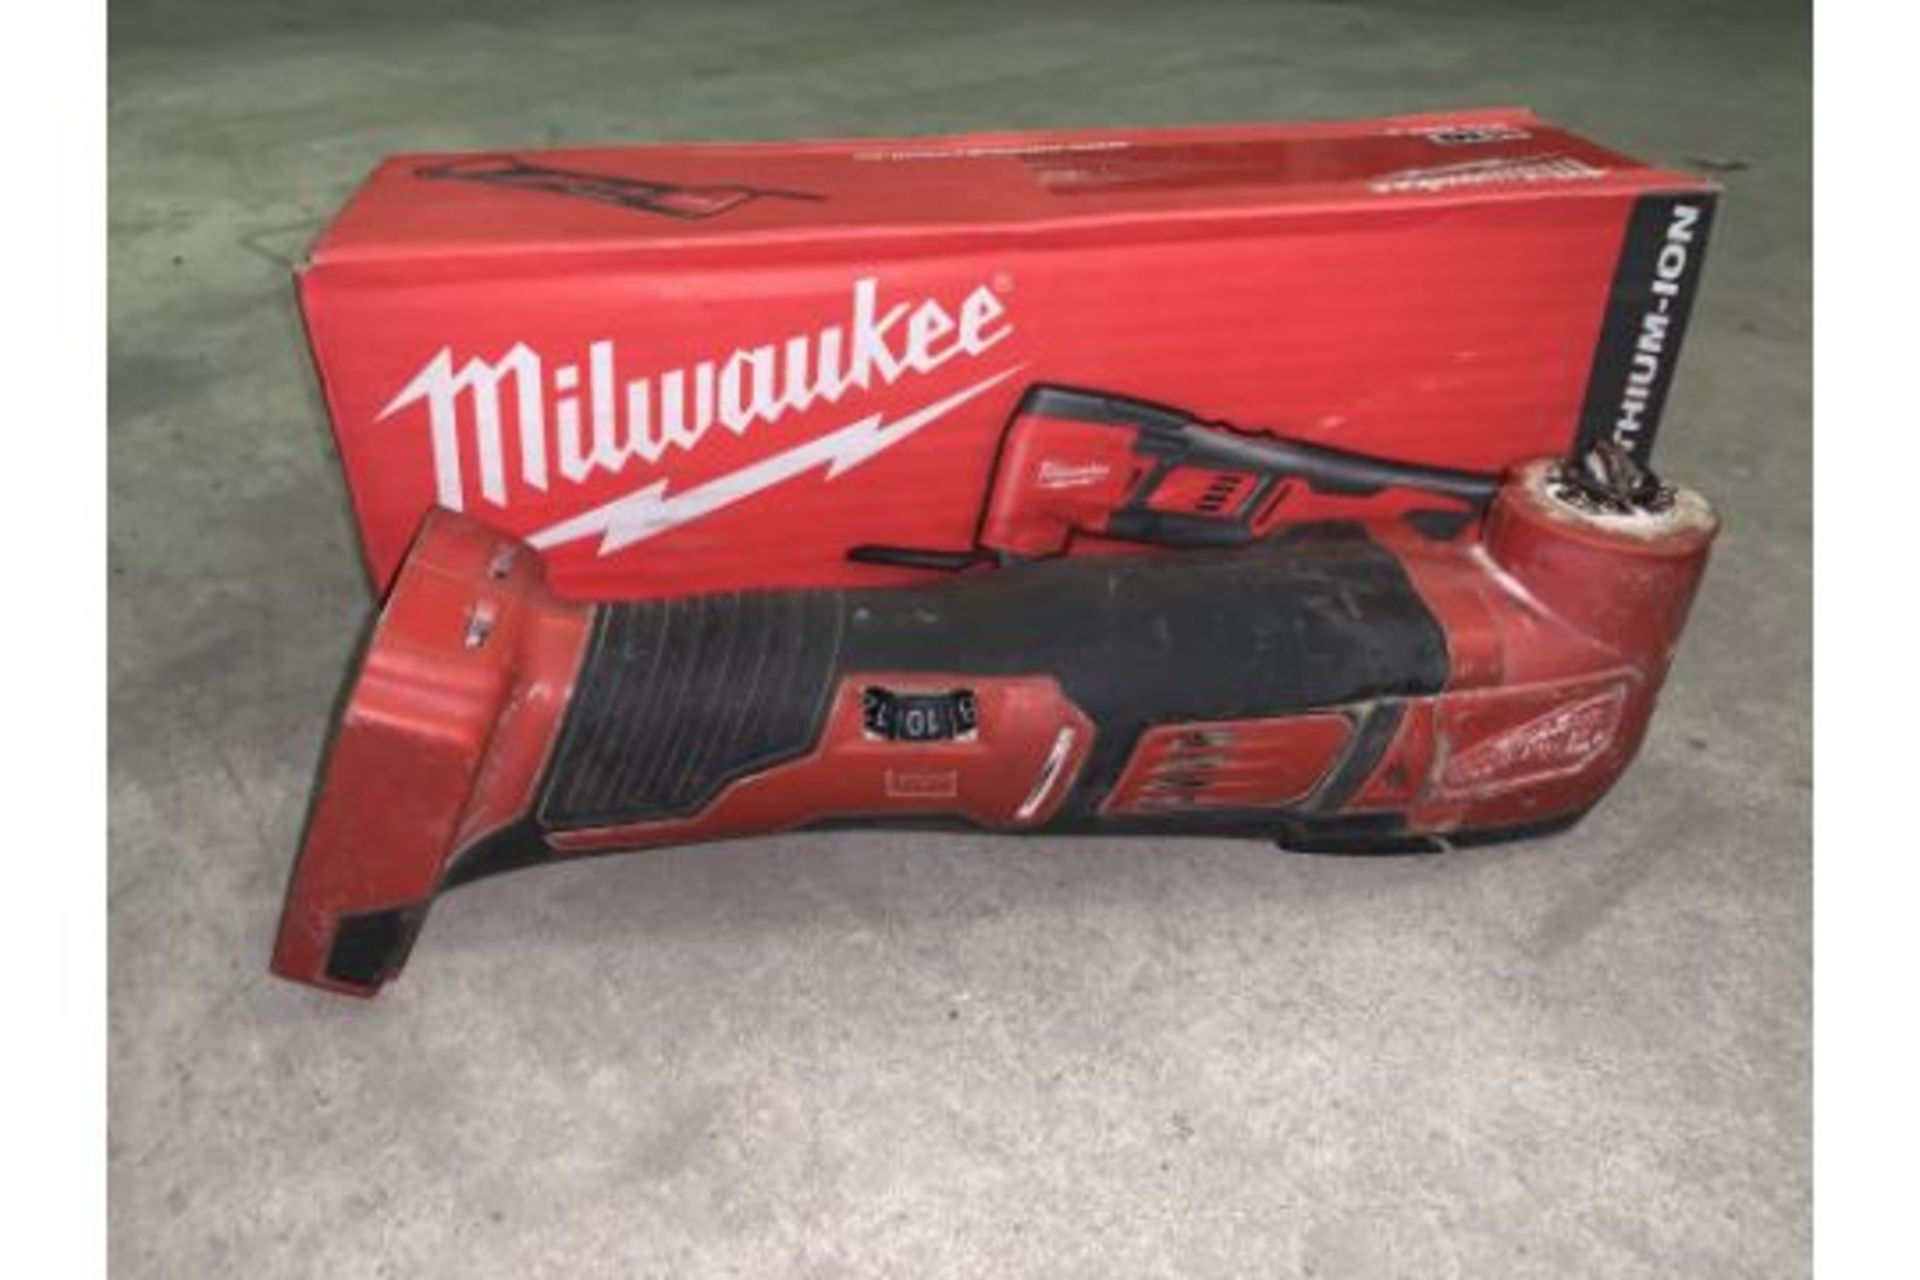 MILWAUKEE M18 BMT-0 18V LI-ION CORDLESS MULTI-TOOL COMES WITH BOX (UNCHECKED / UNTESTED ) 206